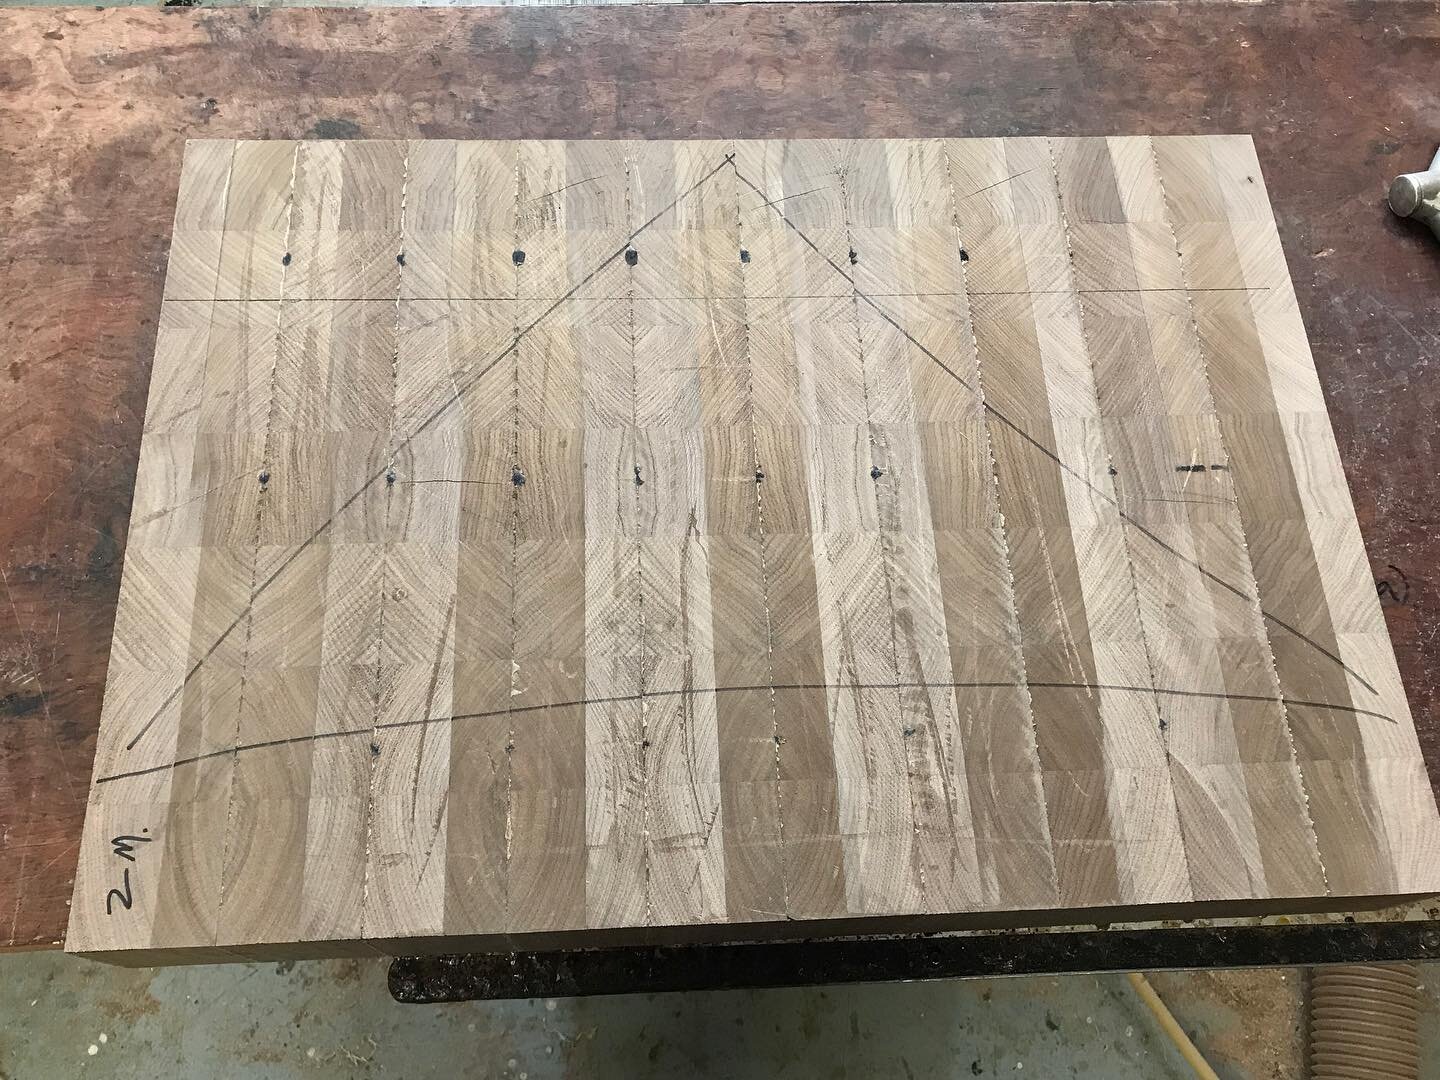 This super-sized 2.5 x 17.5 x 25 Big Block End Grain Walnut Cutting Board will be available soon. Made from one massive kiln dried Walnut Board it will come with six non-skid rubber feet and will make your cutting and kitchen a dream! #cuttingboard #